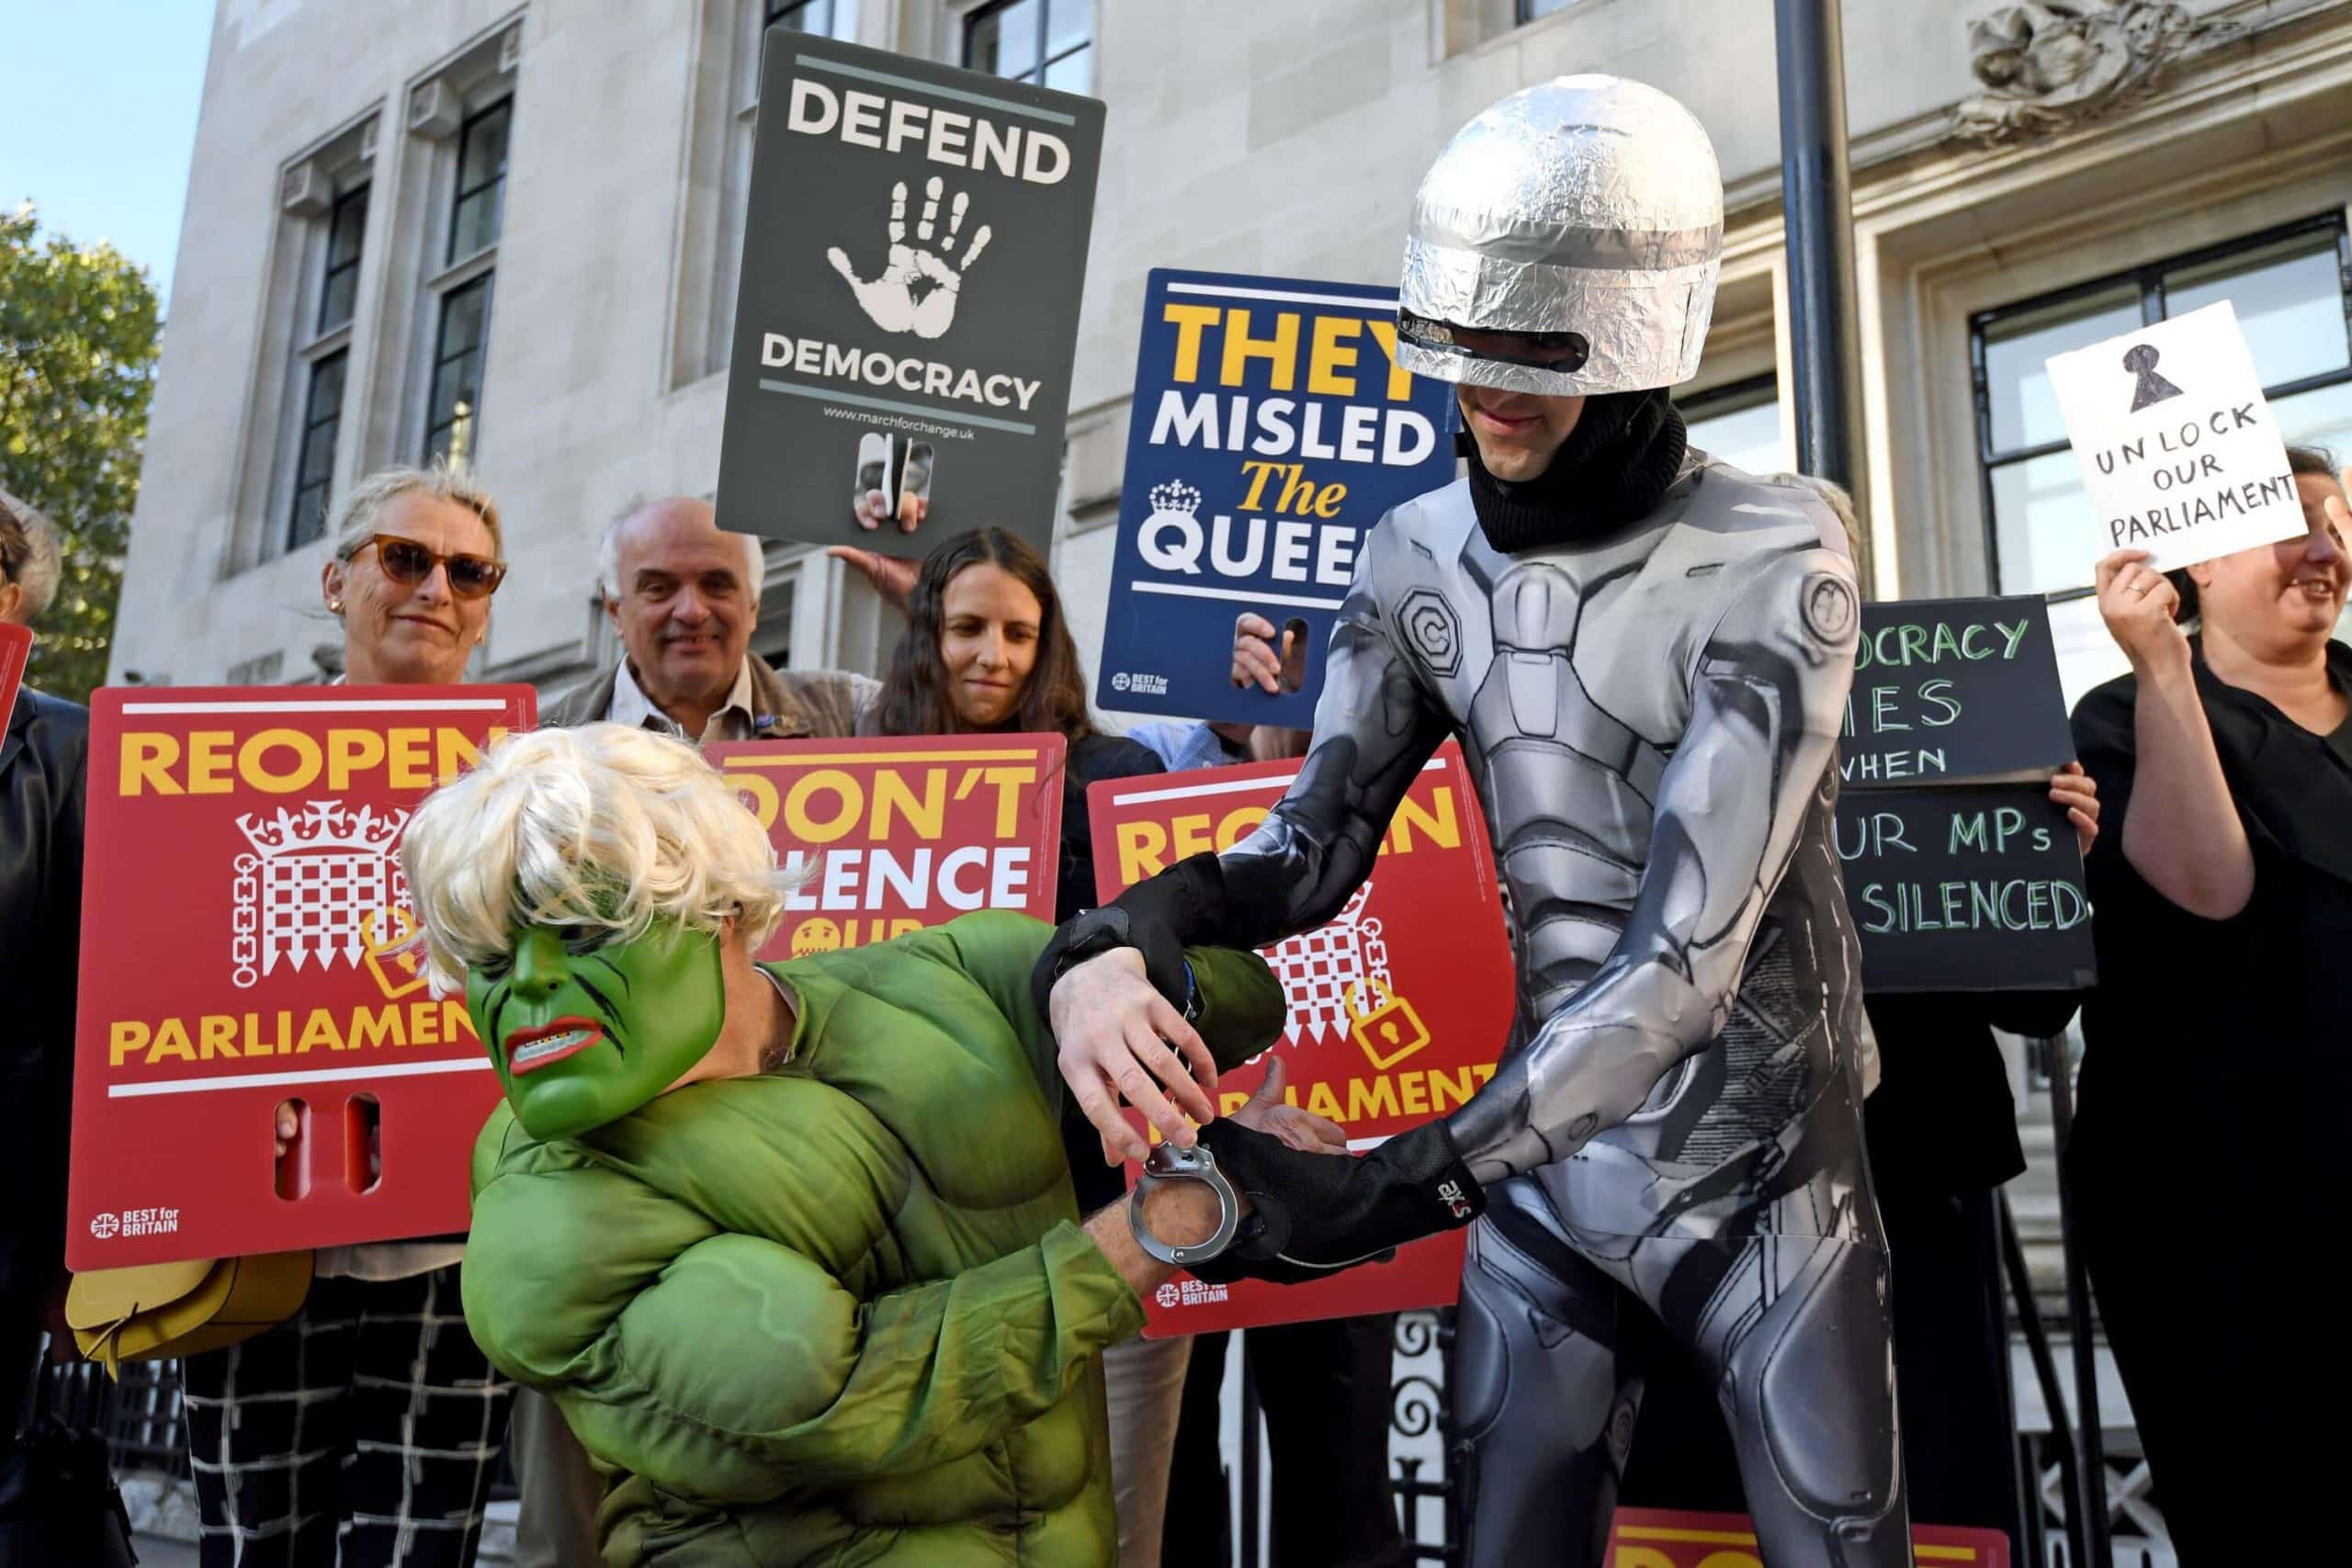 Protester dressed as the Hulk “arrested” by Robocop outside Supreme Court